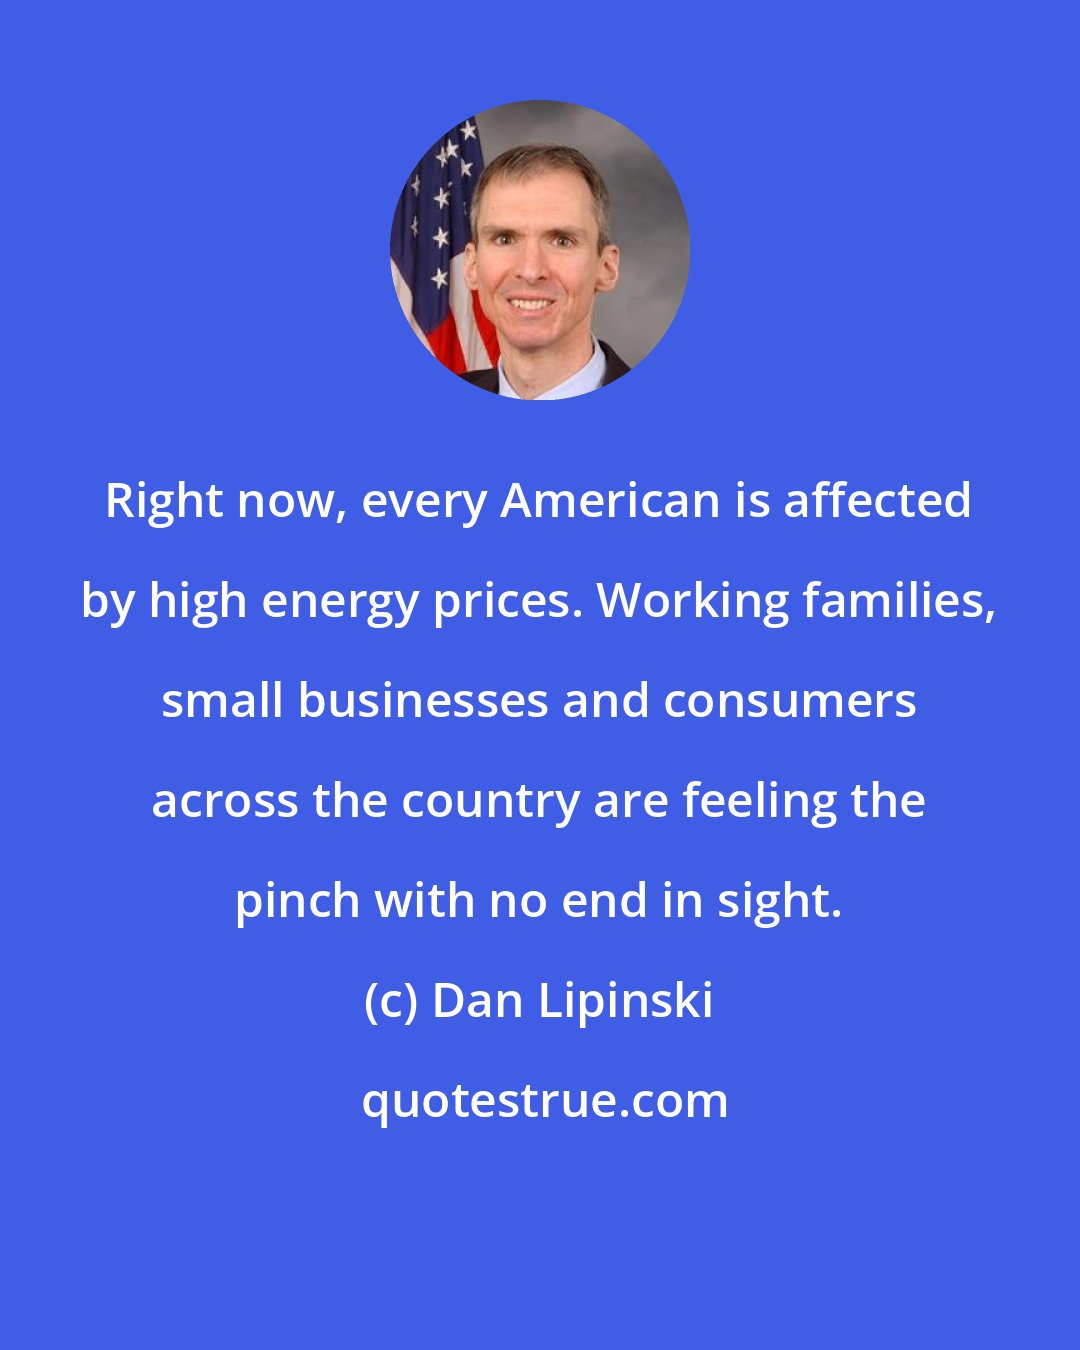 Dan Lipinski: Right now, every American is affected by high energy prices. Working families, small businesses and consumers across the country are feeling the pinch with no end in sight.